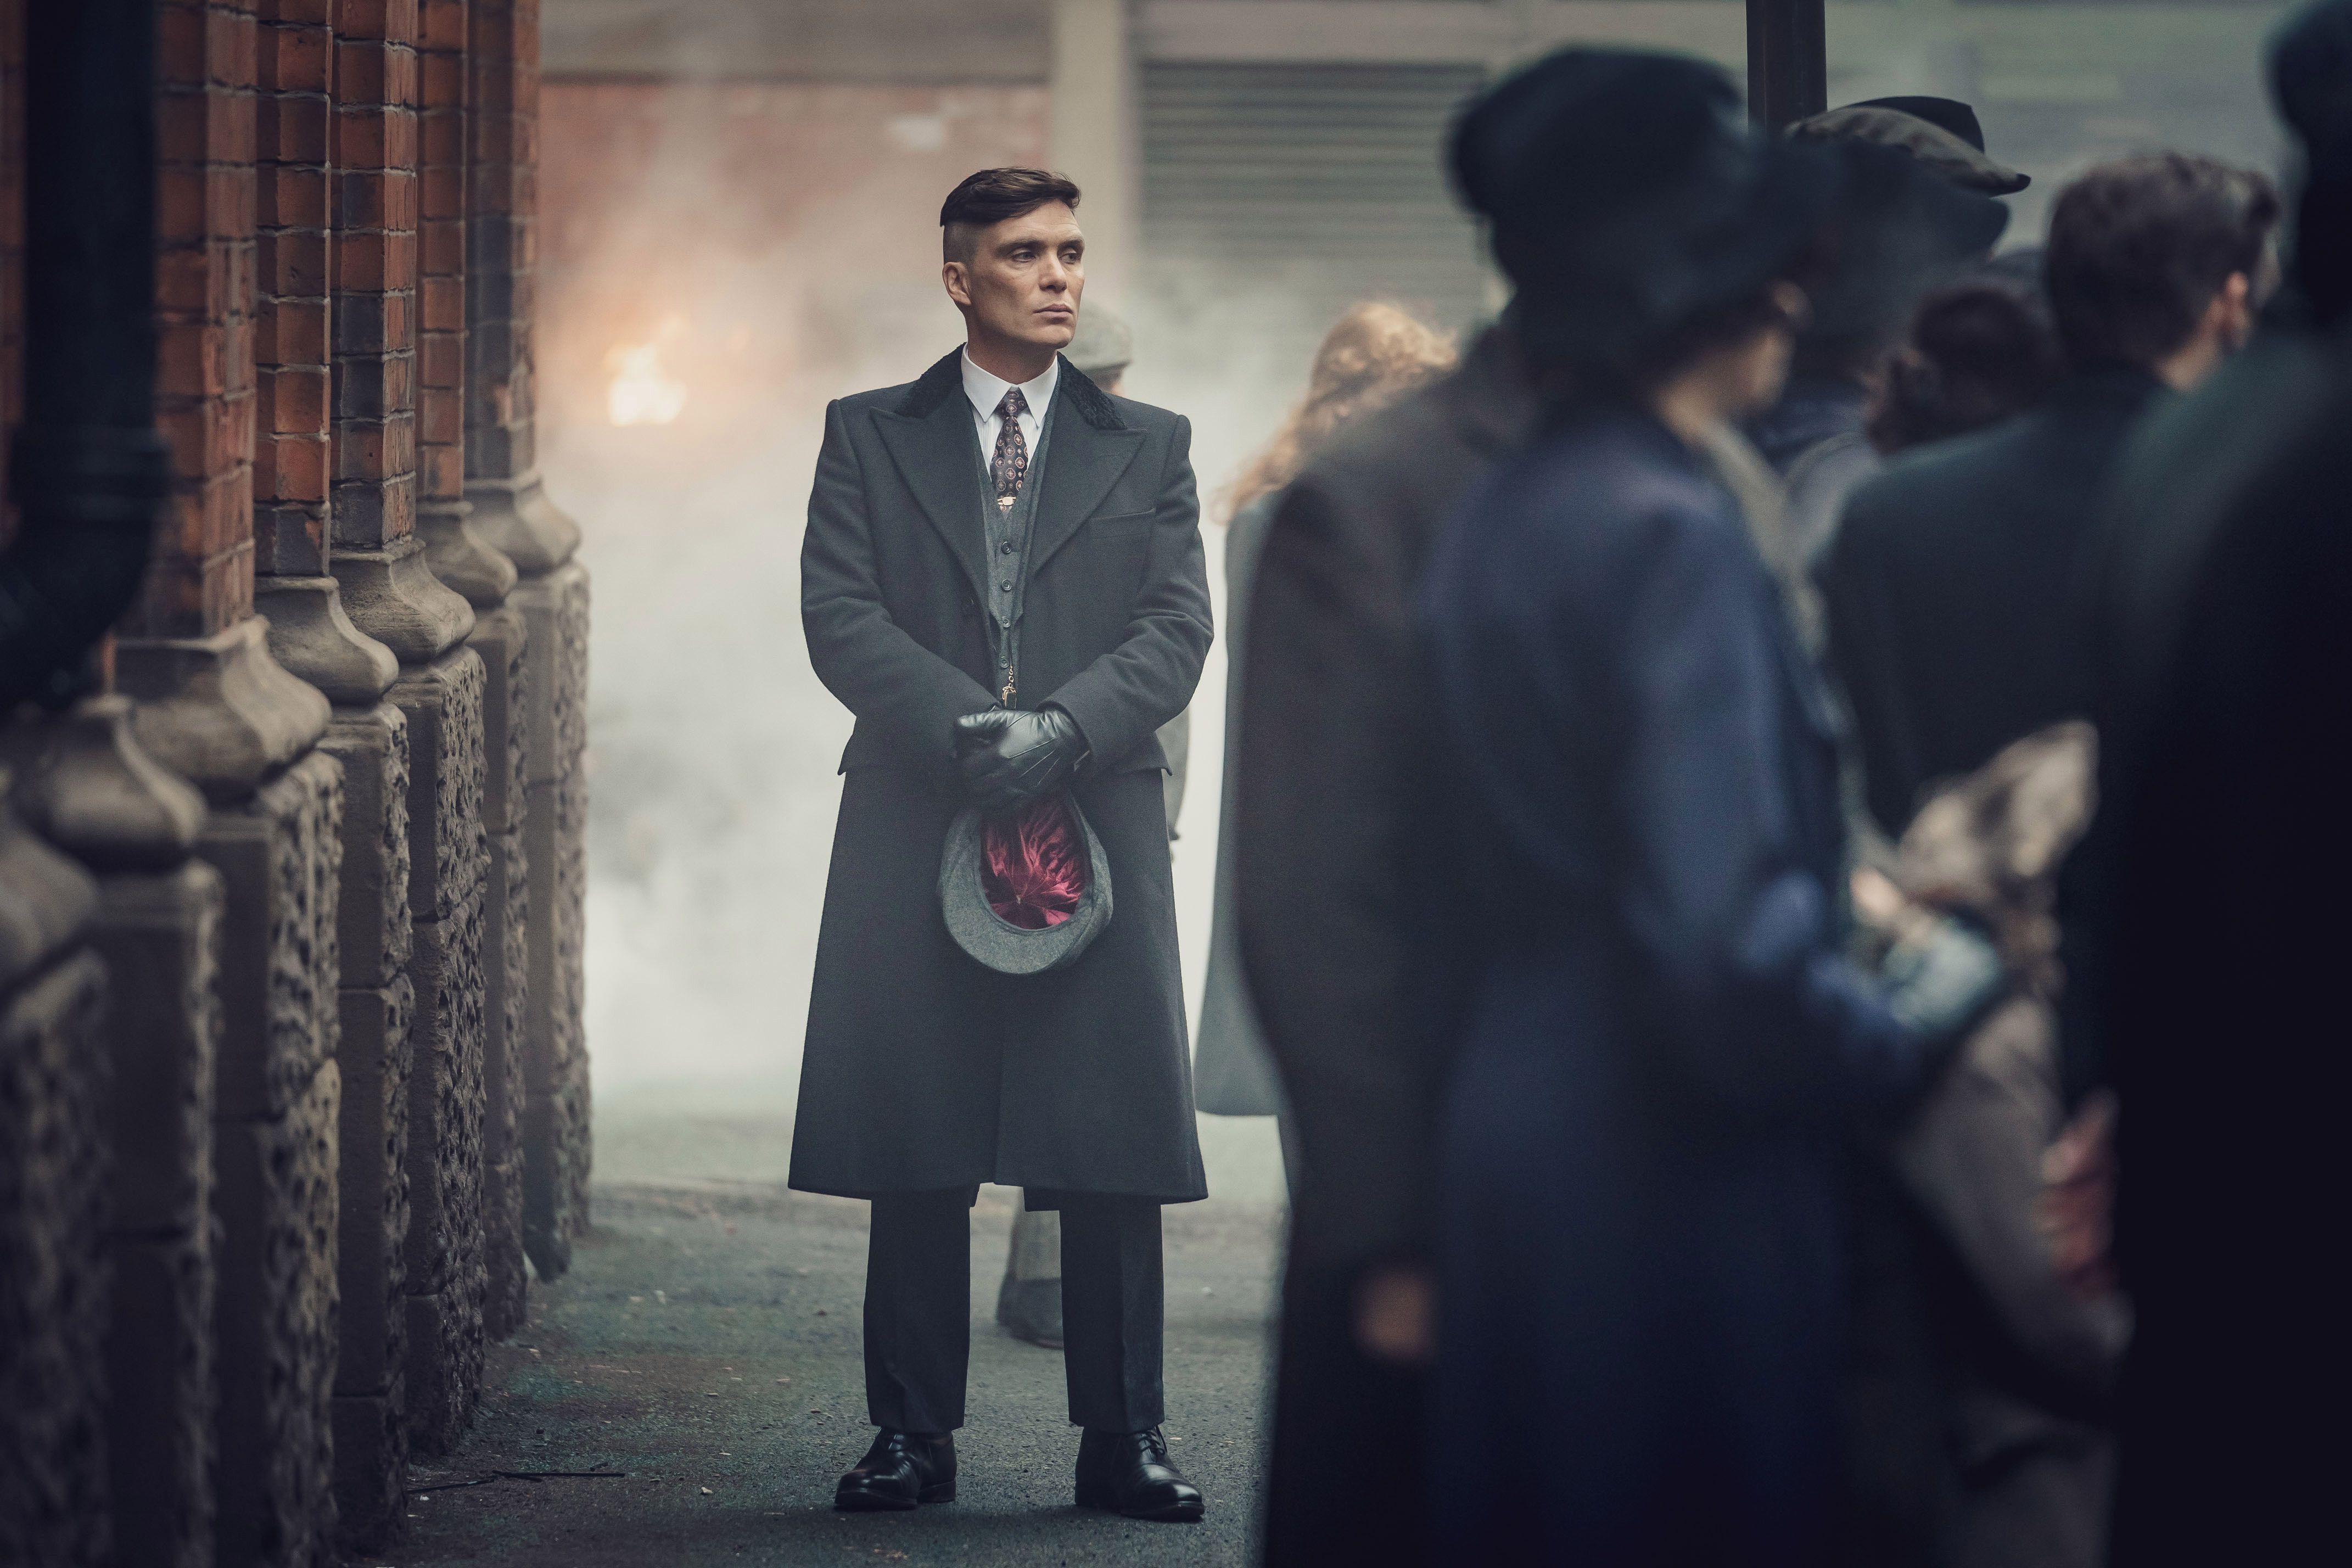 Peaky Blinders season 5 episode 5 sees tragic death and more